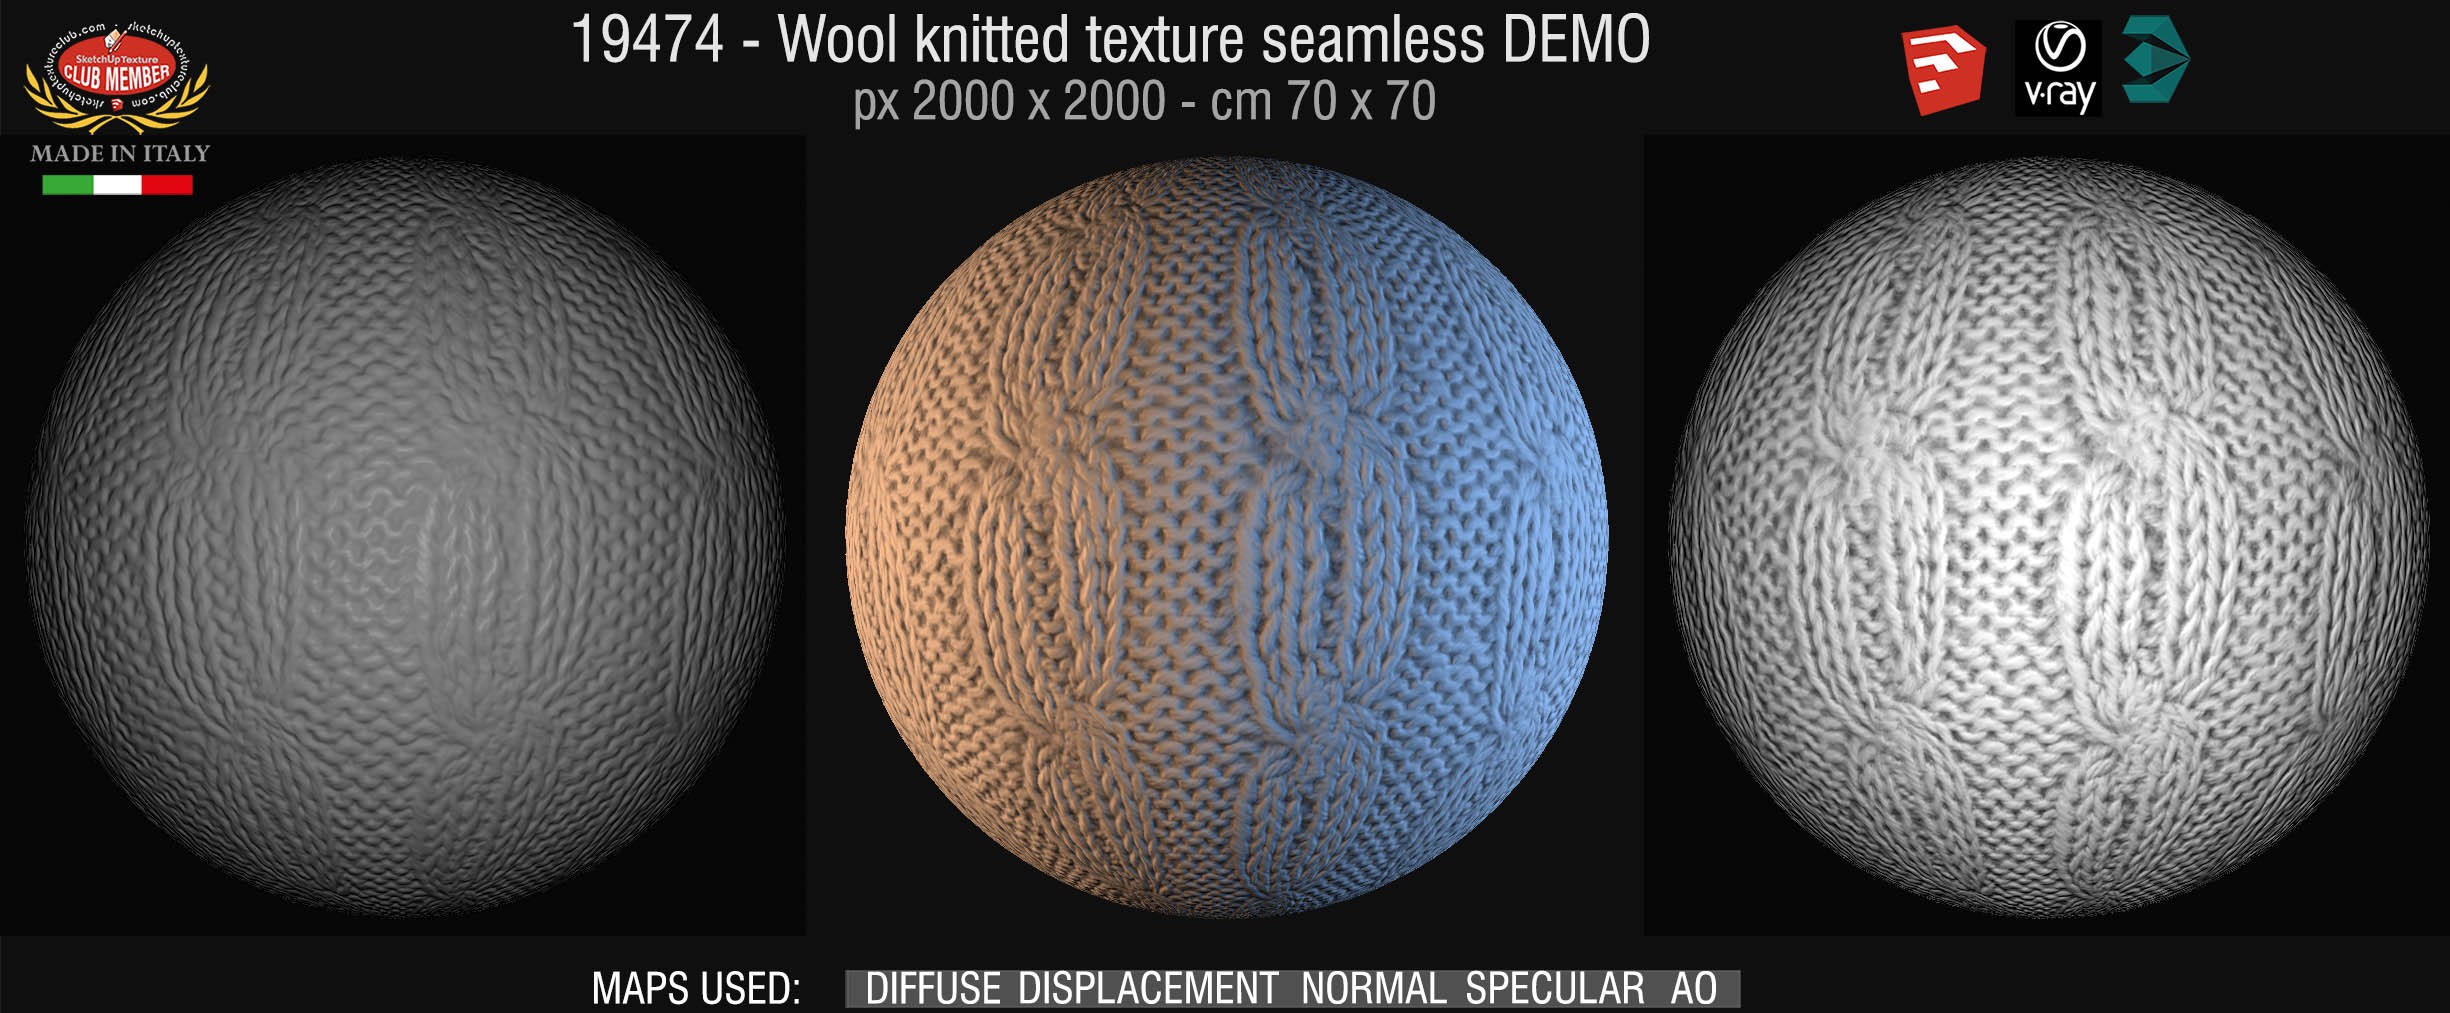 19474 Wool knitted texture seamless + maps DEMO